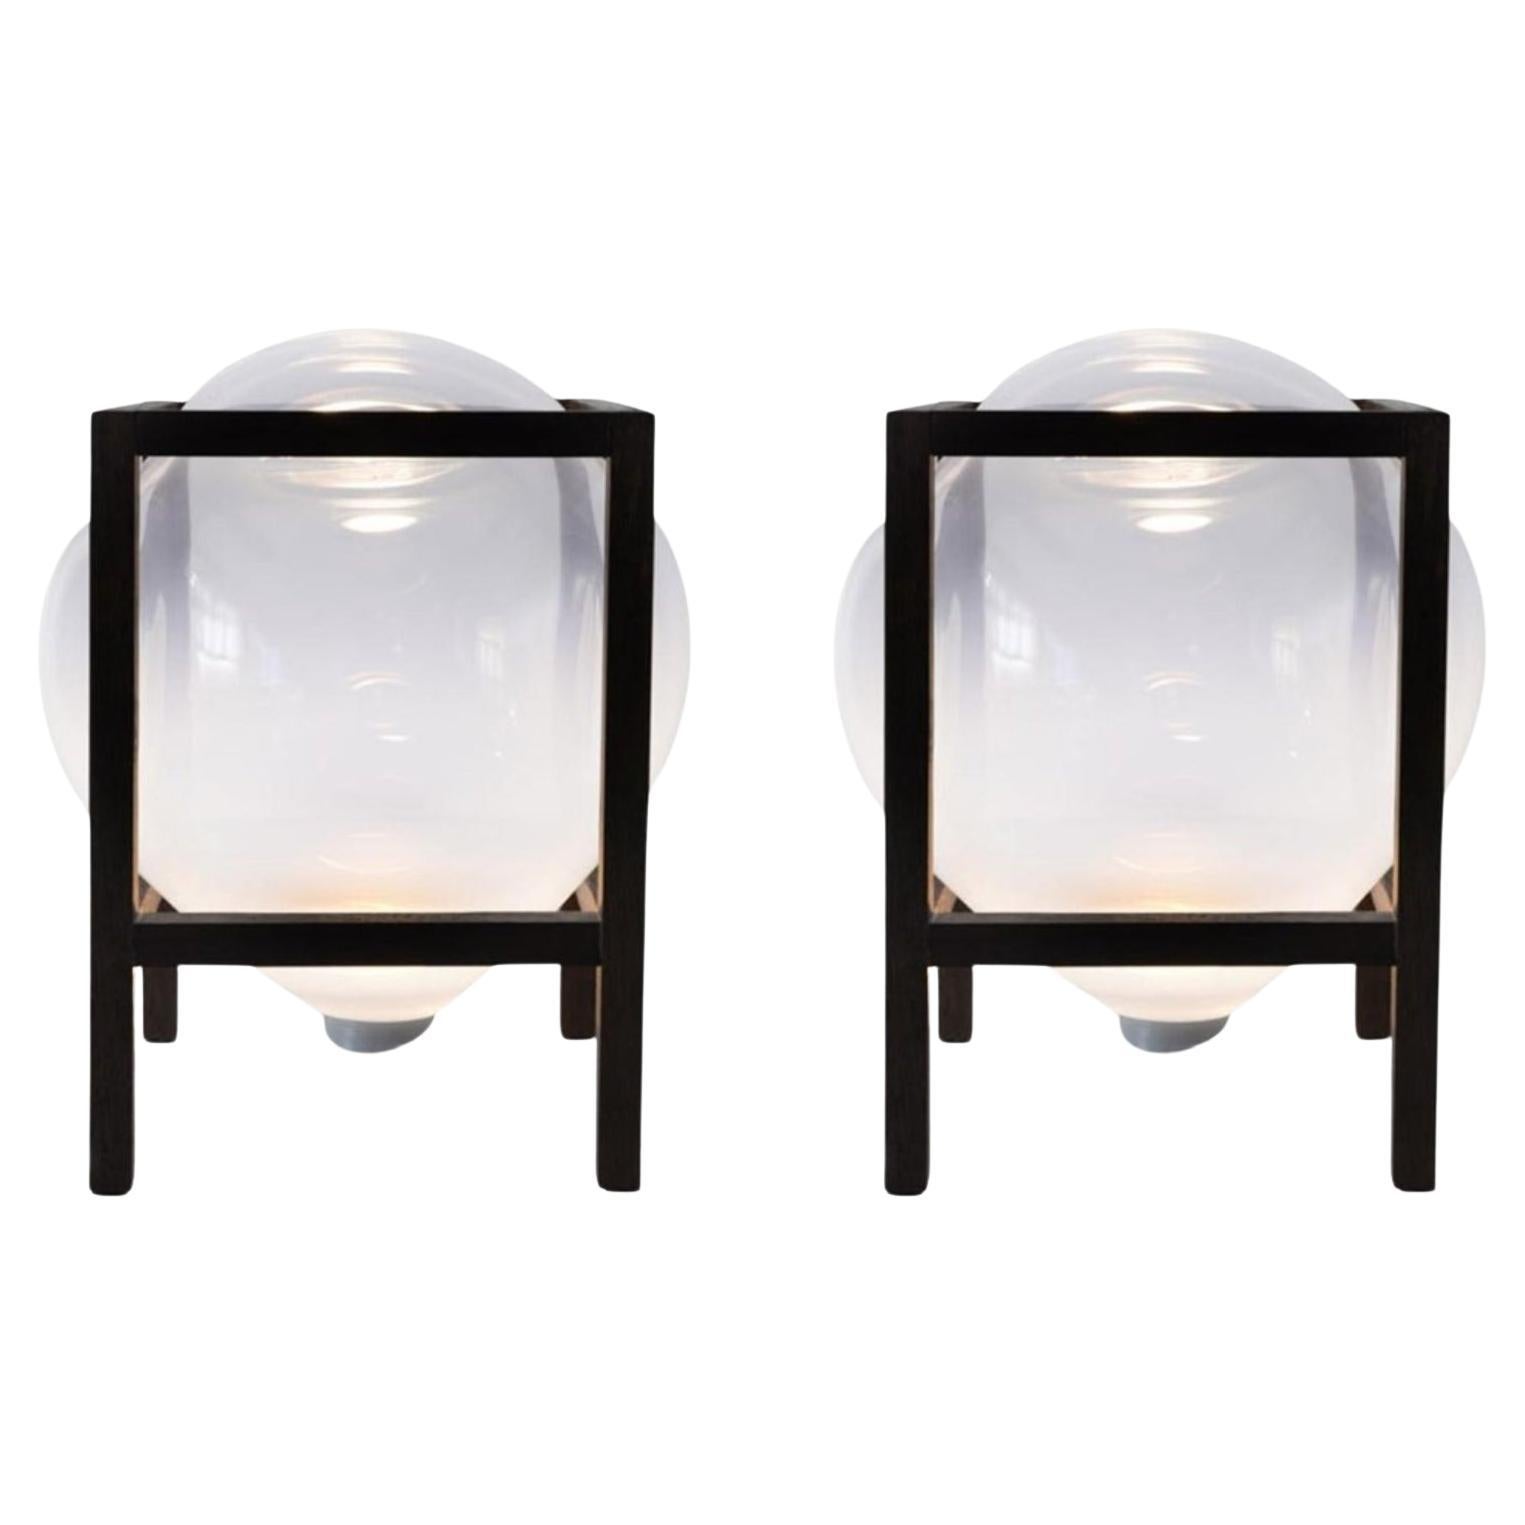 Set of 2 Round Square White Balloon Table Light by Studio Thier & Van Daalen